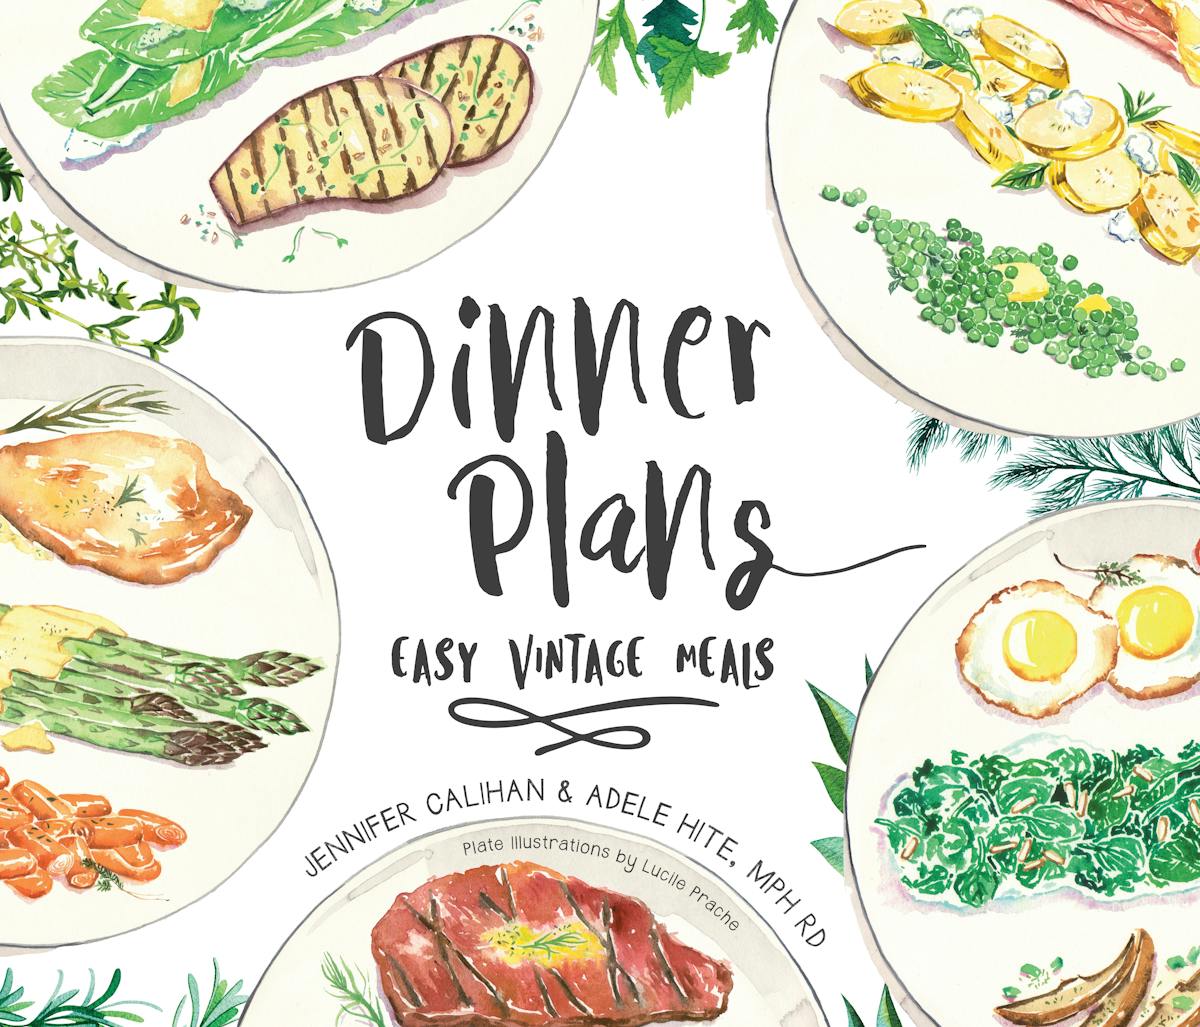 Book cover for the creative mix-and-match cookbook Dinner Plans: Easy Vintage Meals.